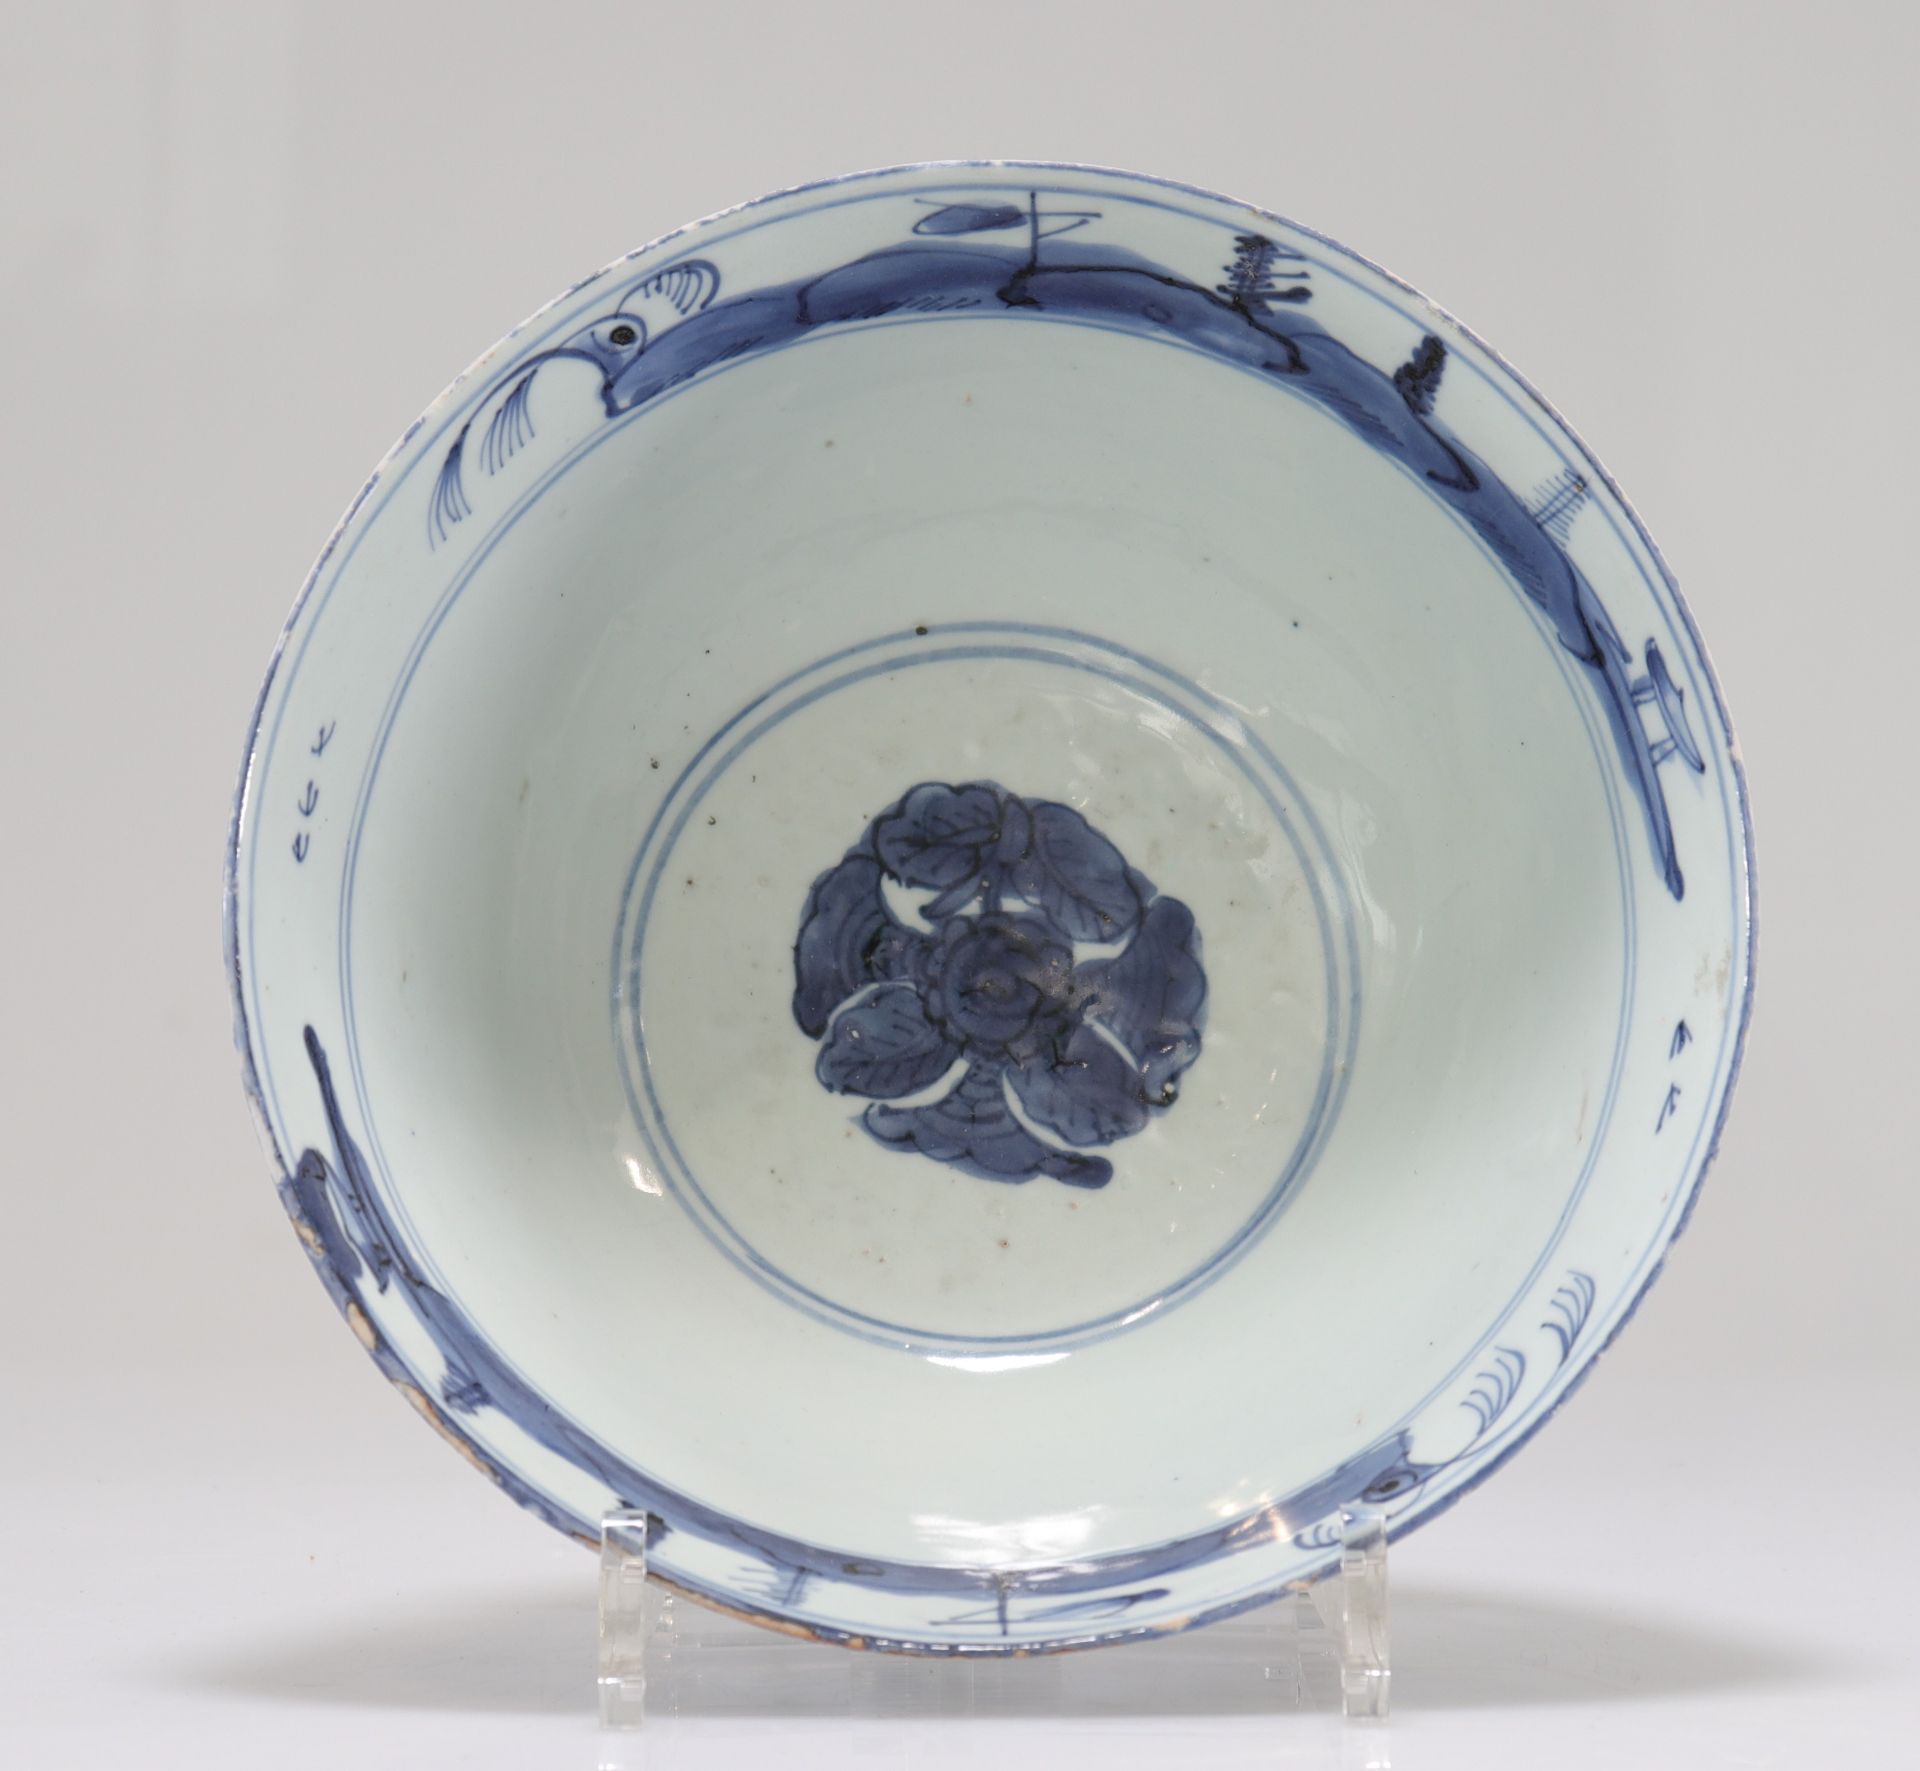 Large "blanc-bleu" porcelain bowl from the Ming period - Image 5 of 6